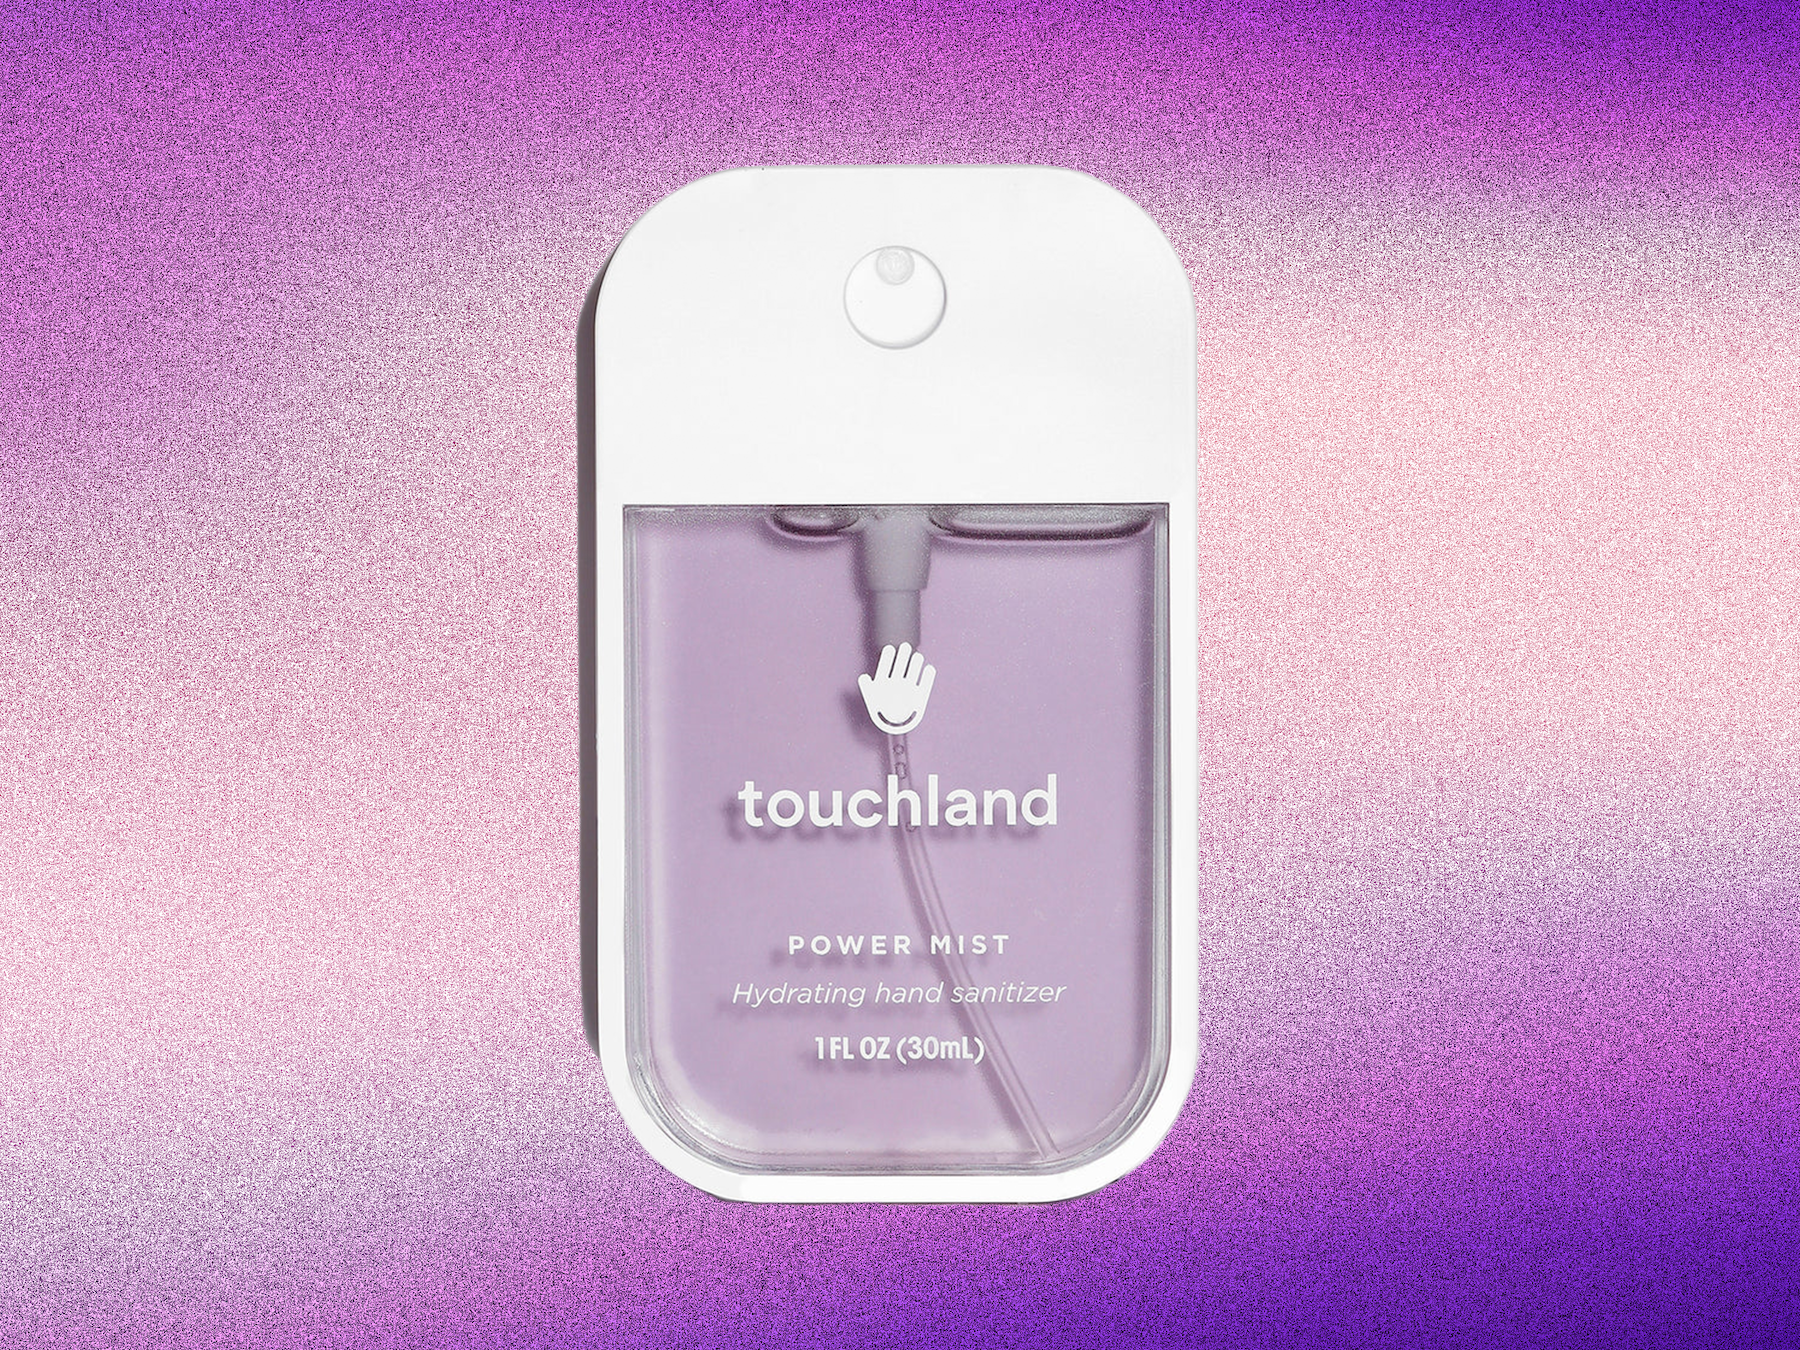 Product of the Week: Touchland Power Mist Hand Sanitizer